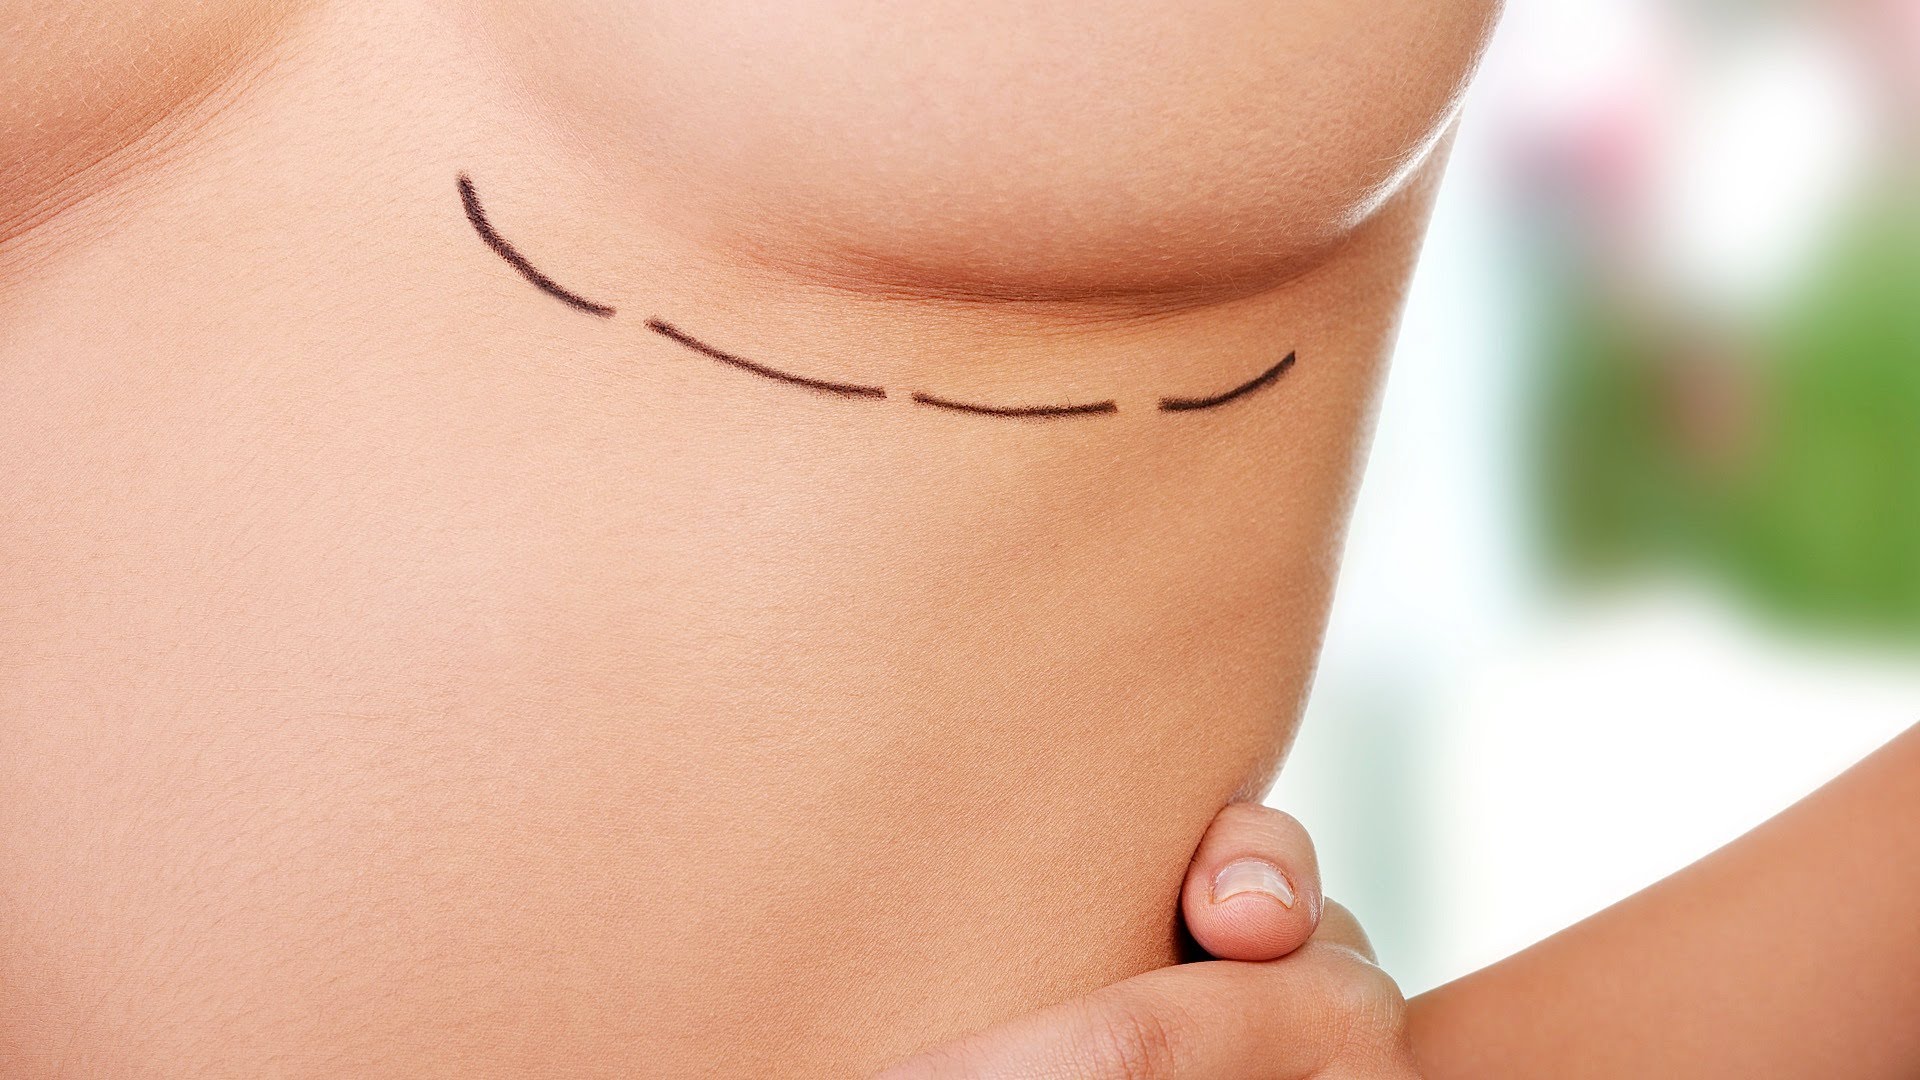 Dissatisfaction with breasts may mean fewer self-checks for cancer